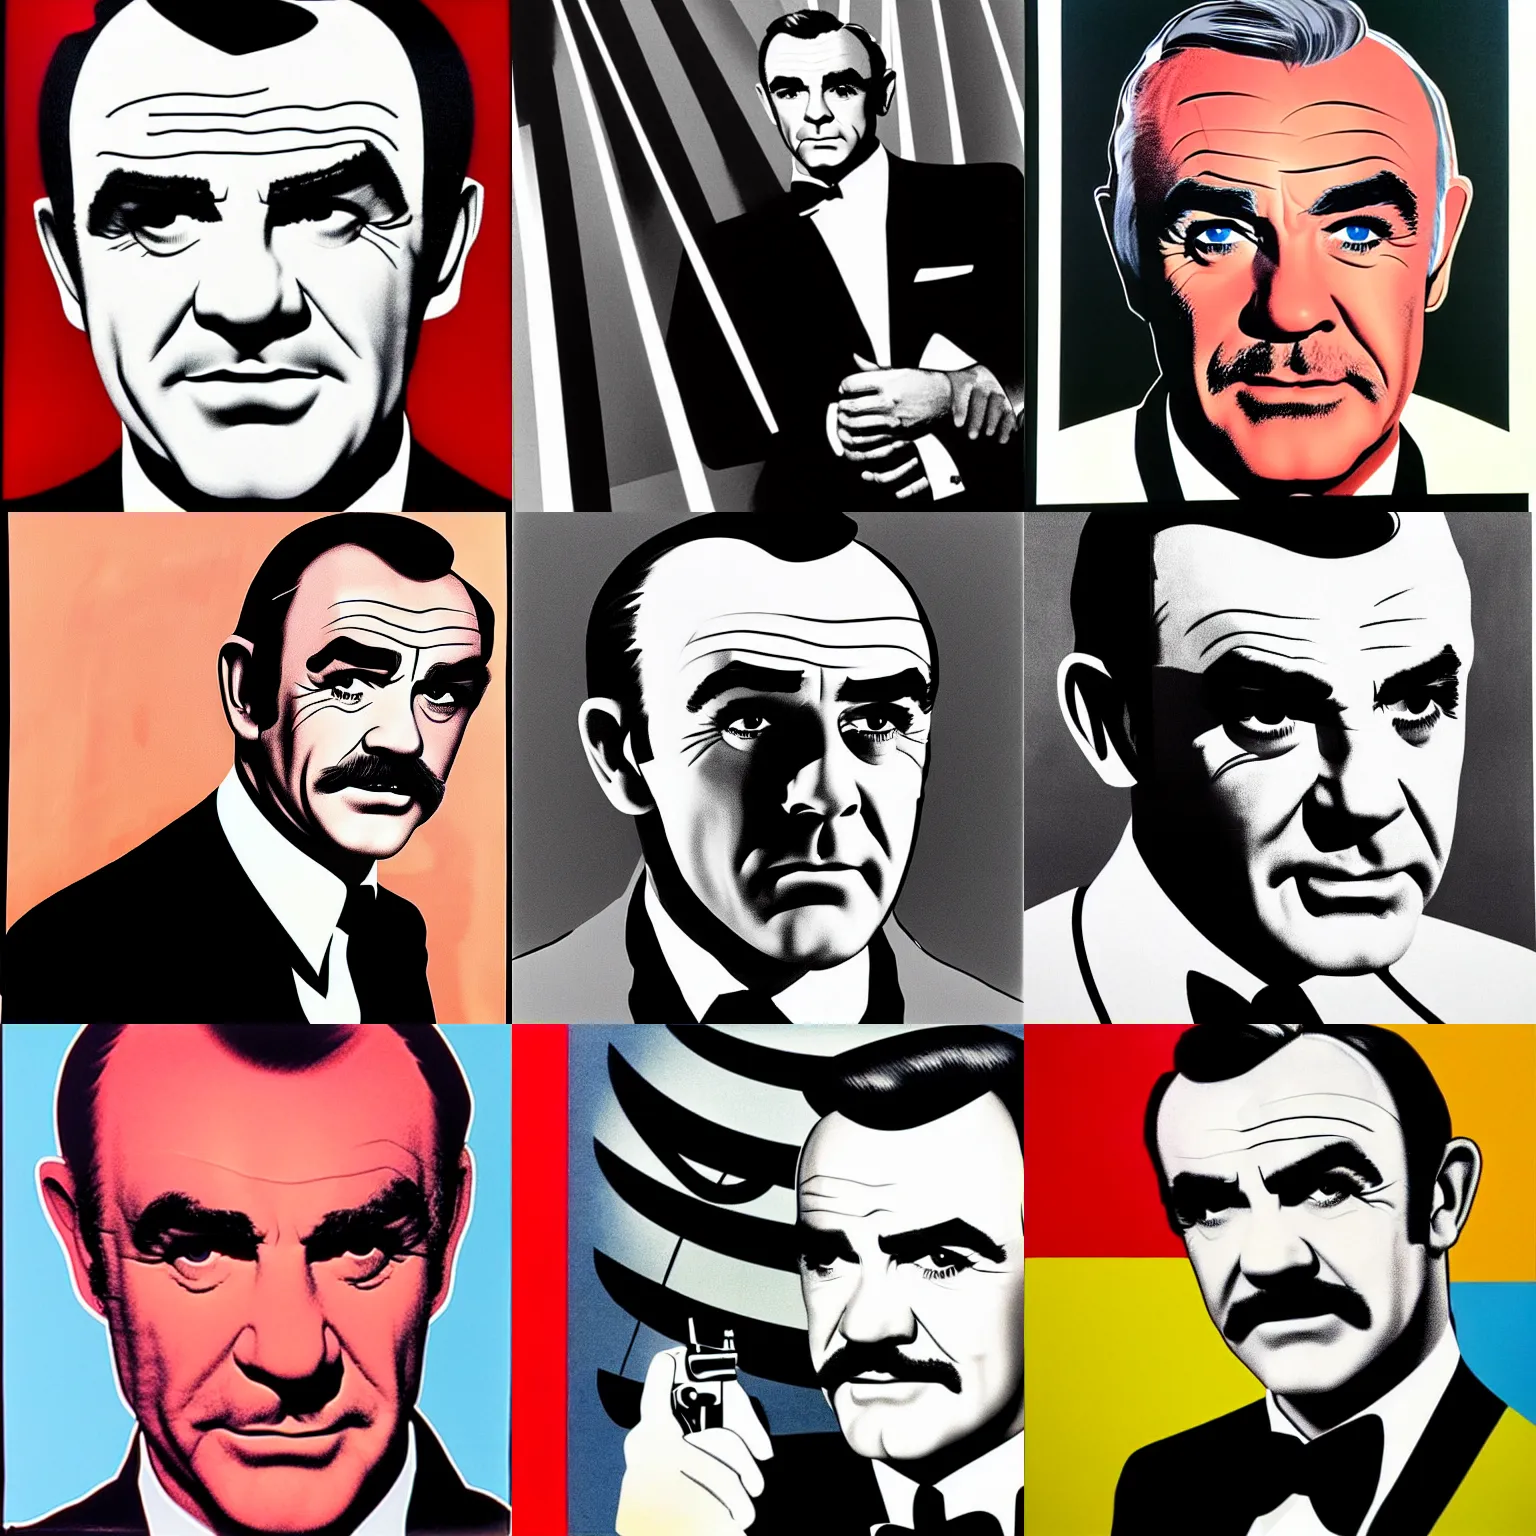 Prompt: Sean Connery as James bond by andy warhol